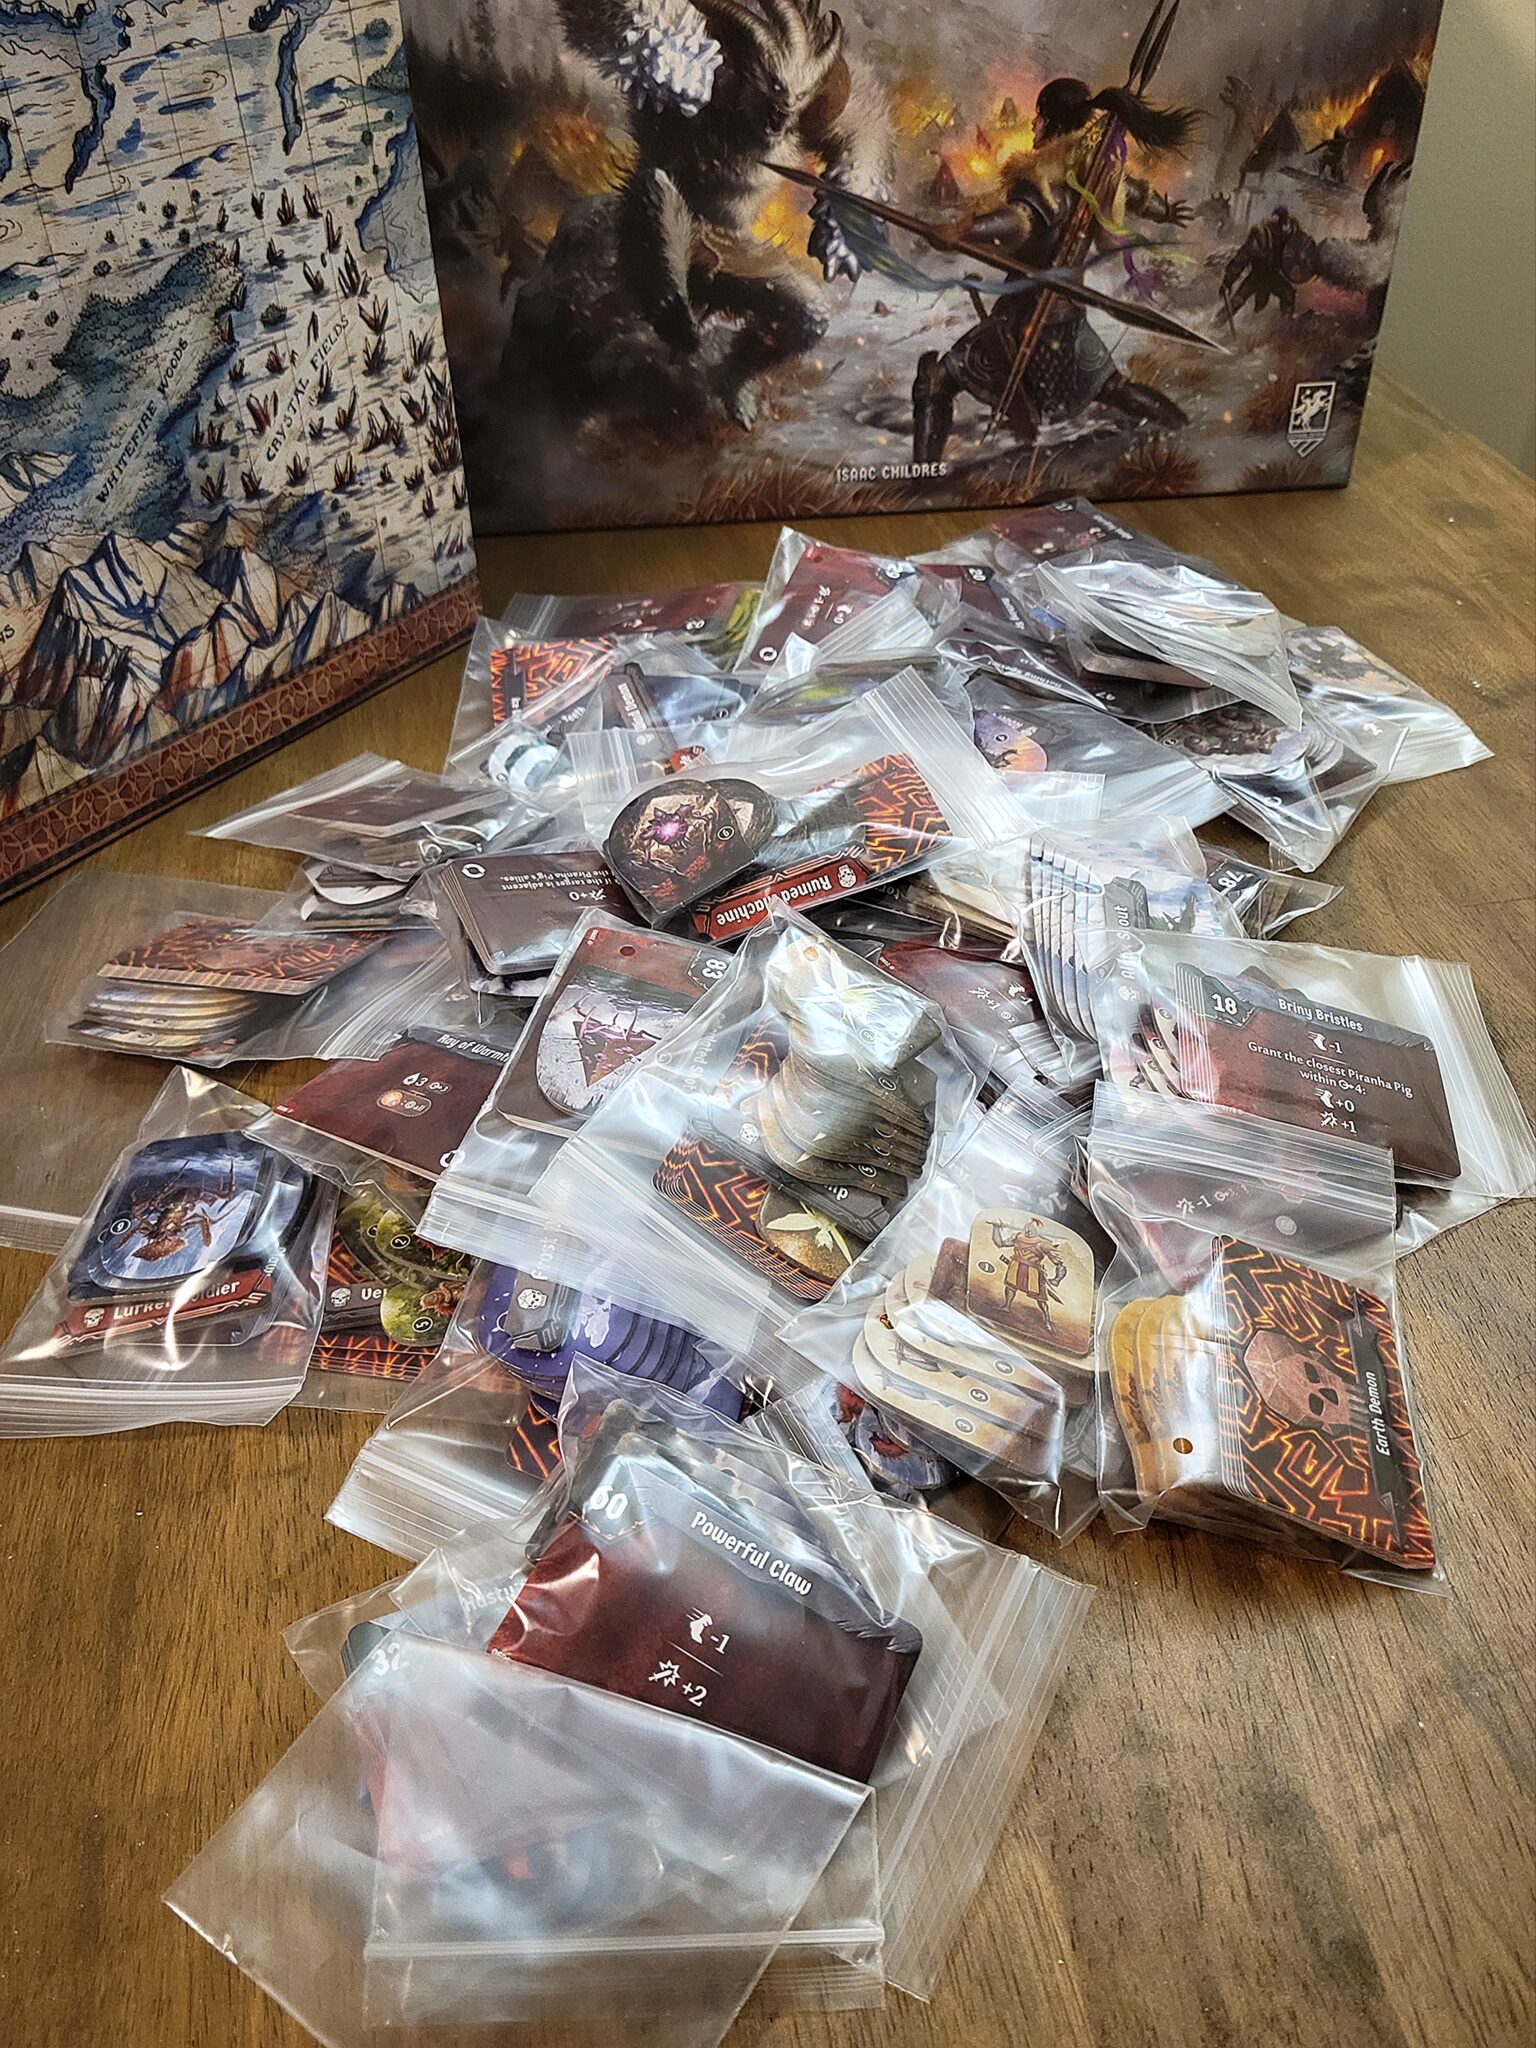 Frosthaven enemy standees in bags